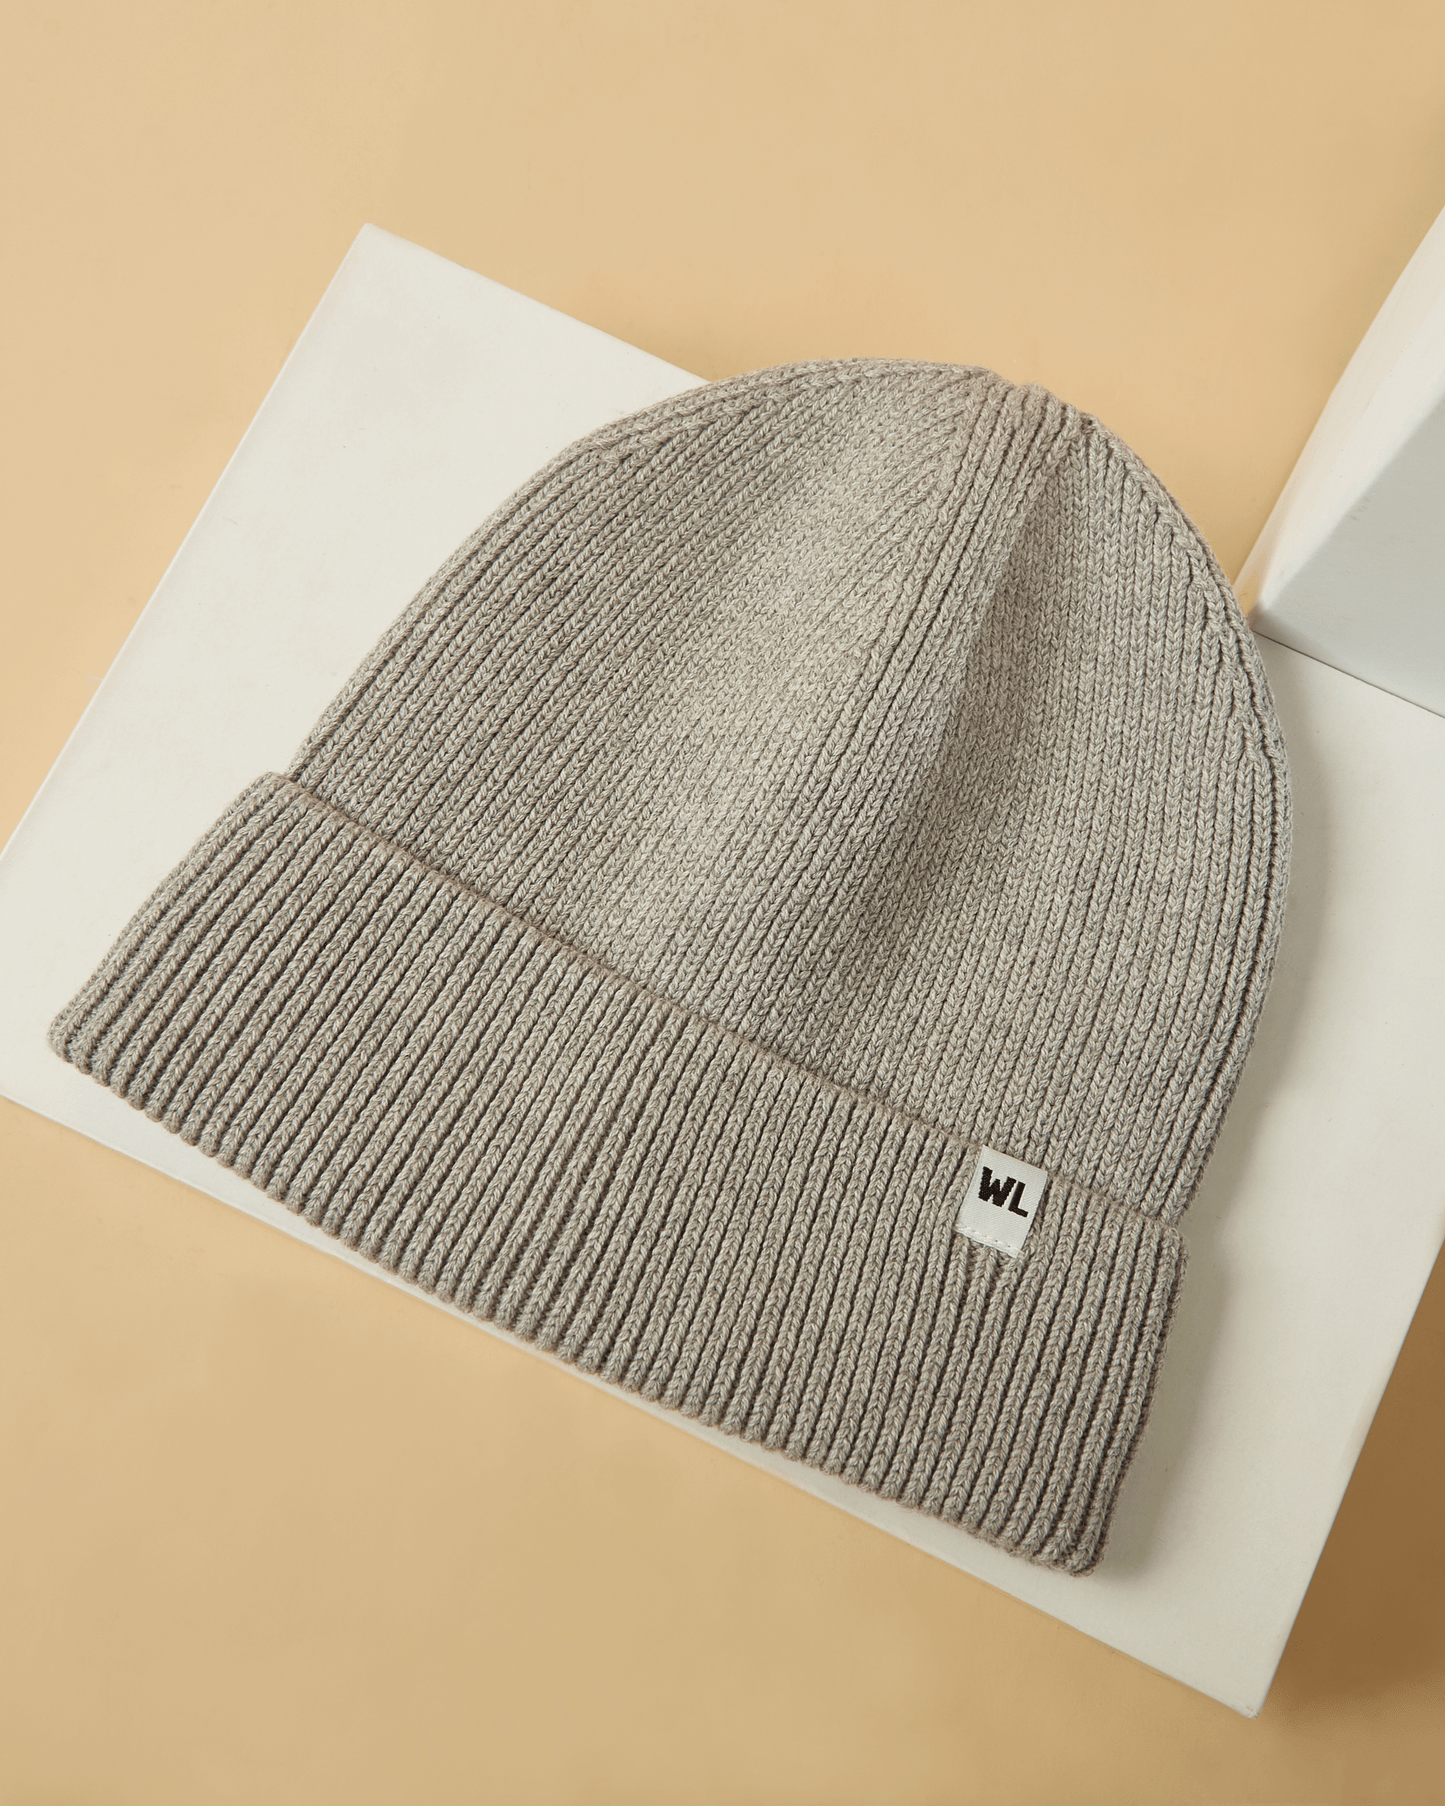 The Wrap Life Cuffed Satin Lined Beanie in Dove Grey Grey Hat